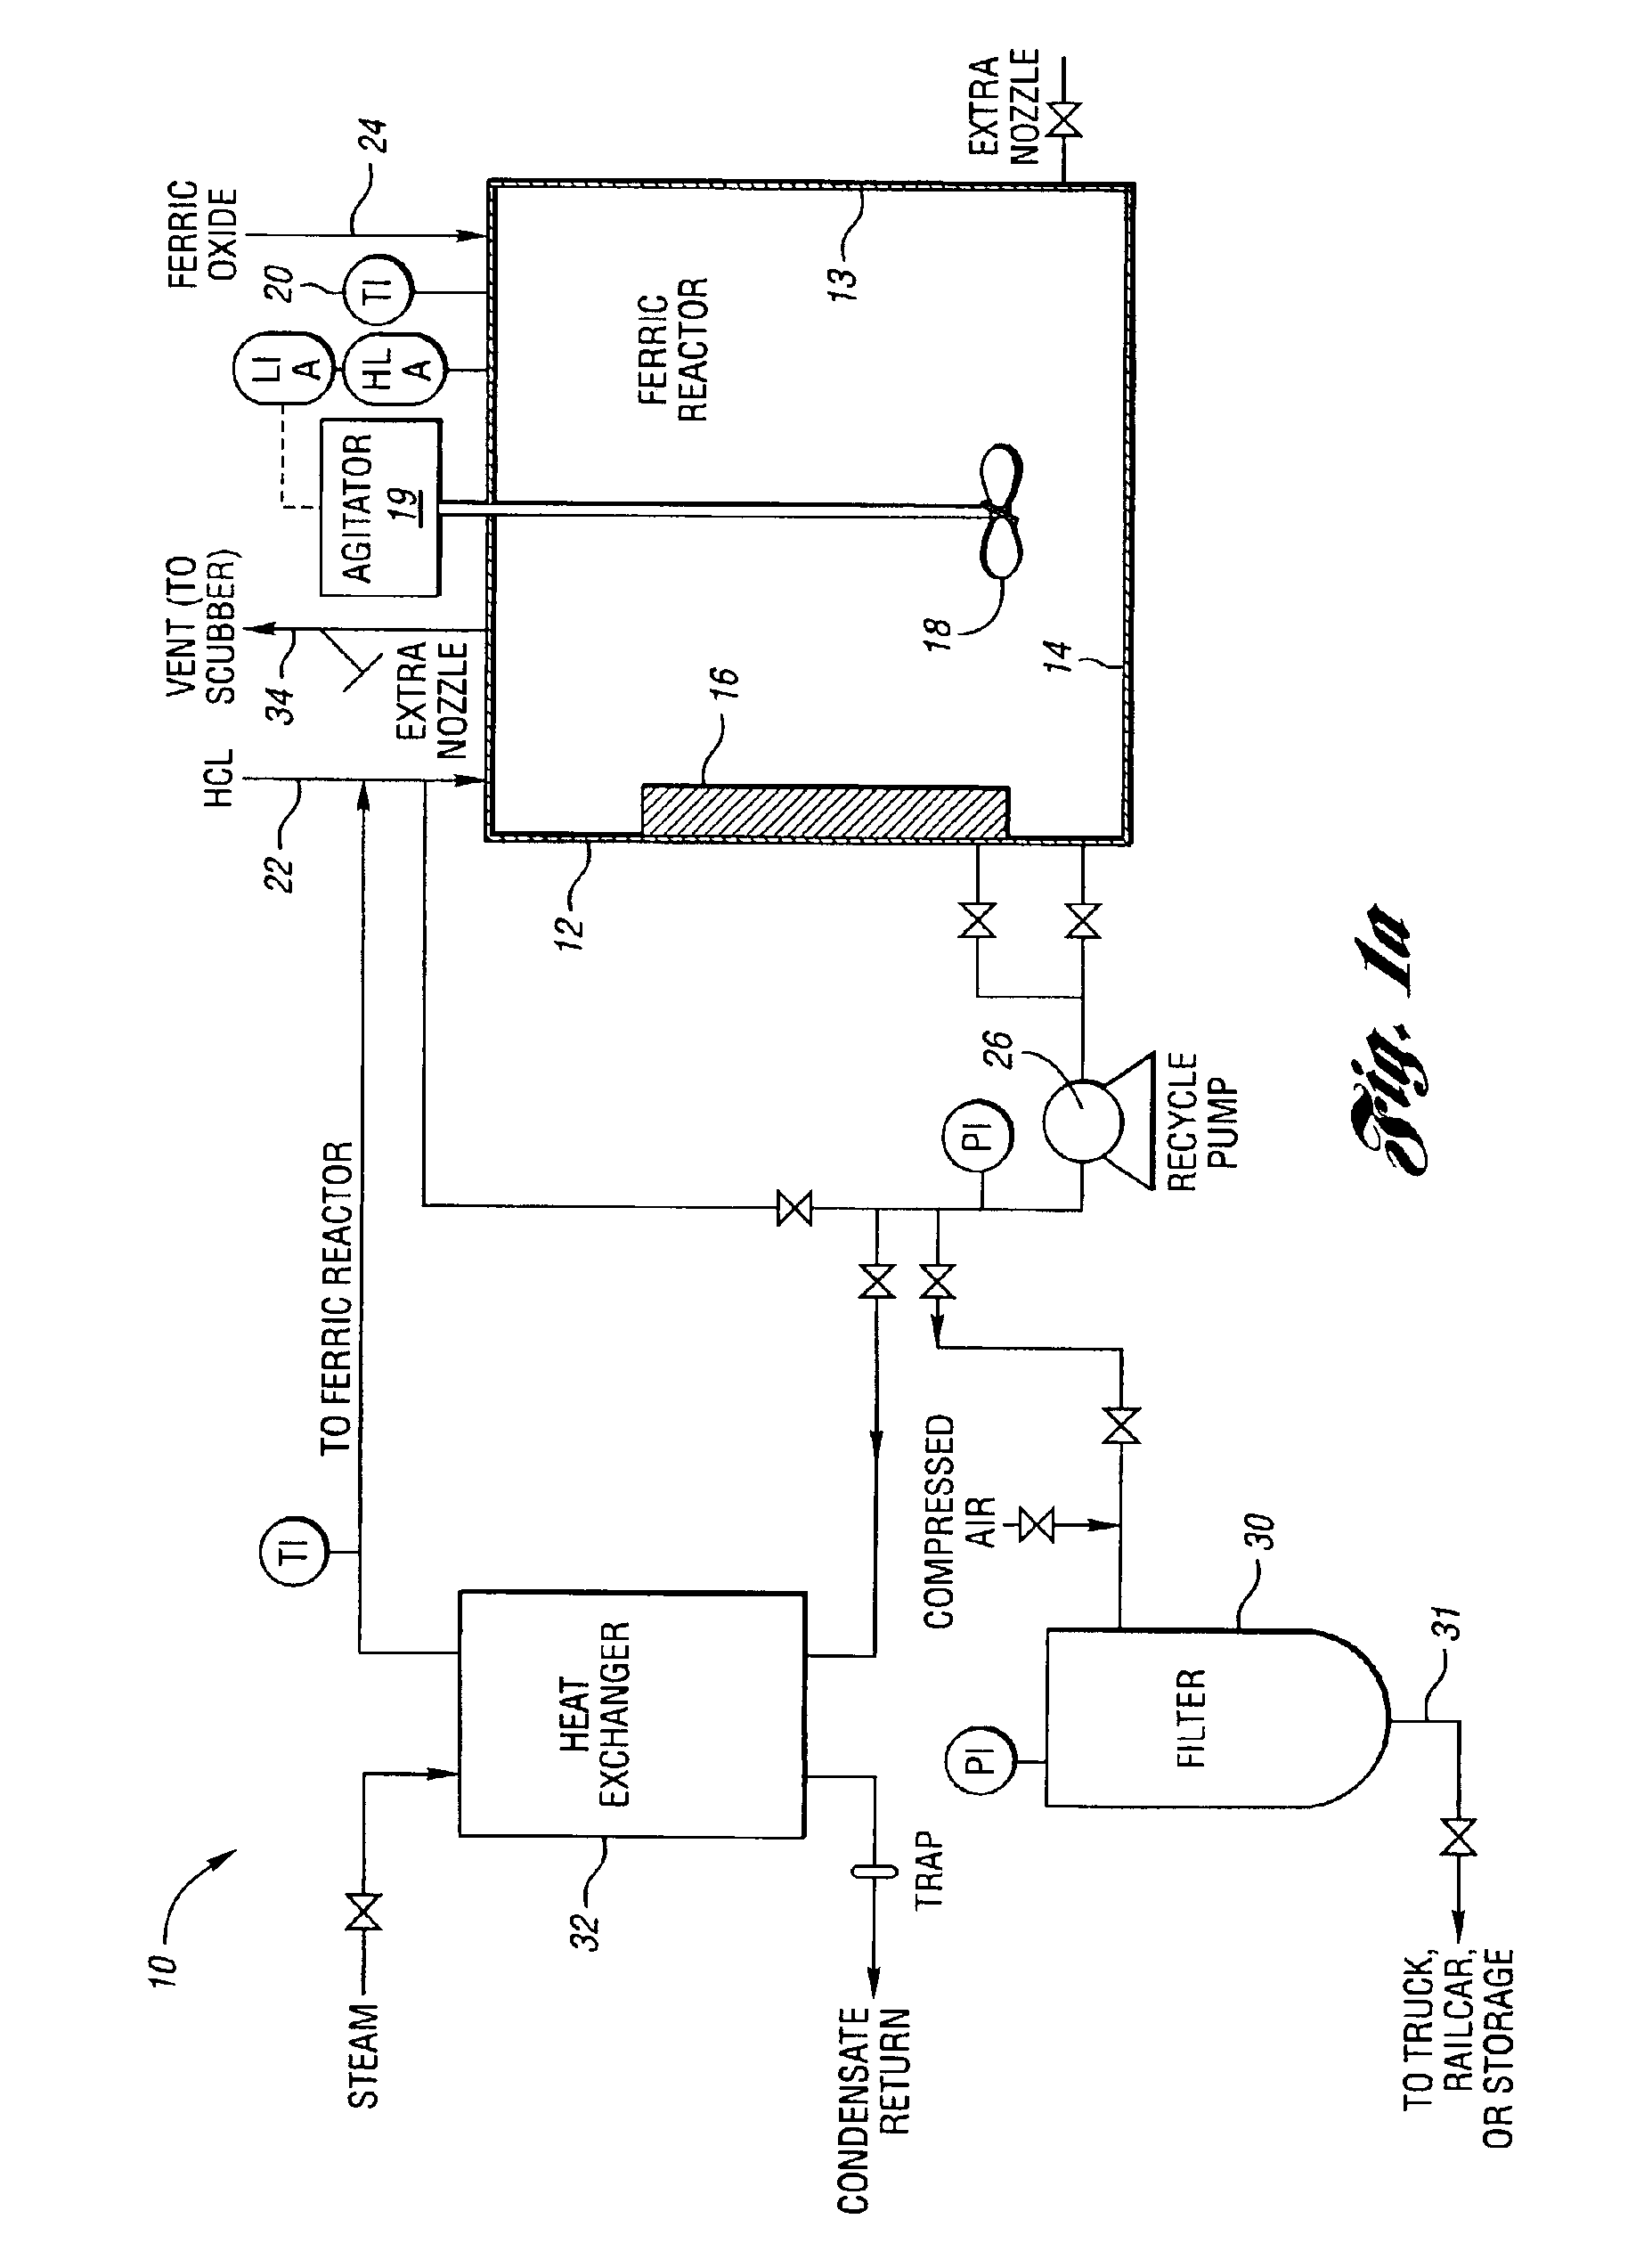 Method of making ferric chloride with reduced amounts of hydrochloric acid for water treatment